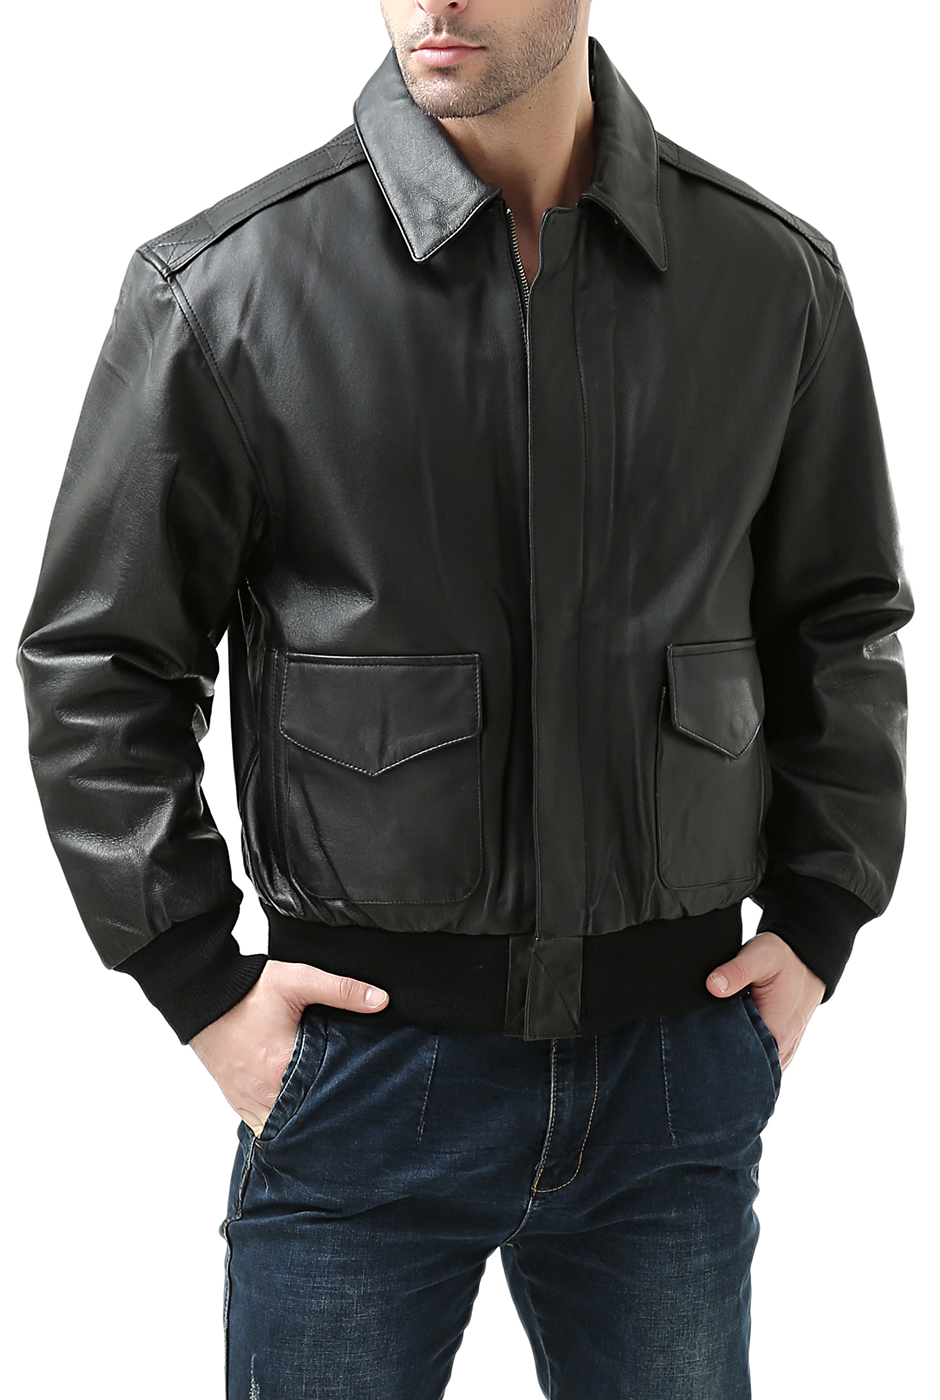 Landing Leathers Mens Air Force A-2 Leather Flight Bomber Jacket (Regular & Tall) - image 4 of 7